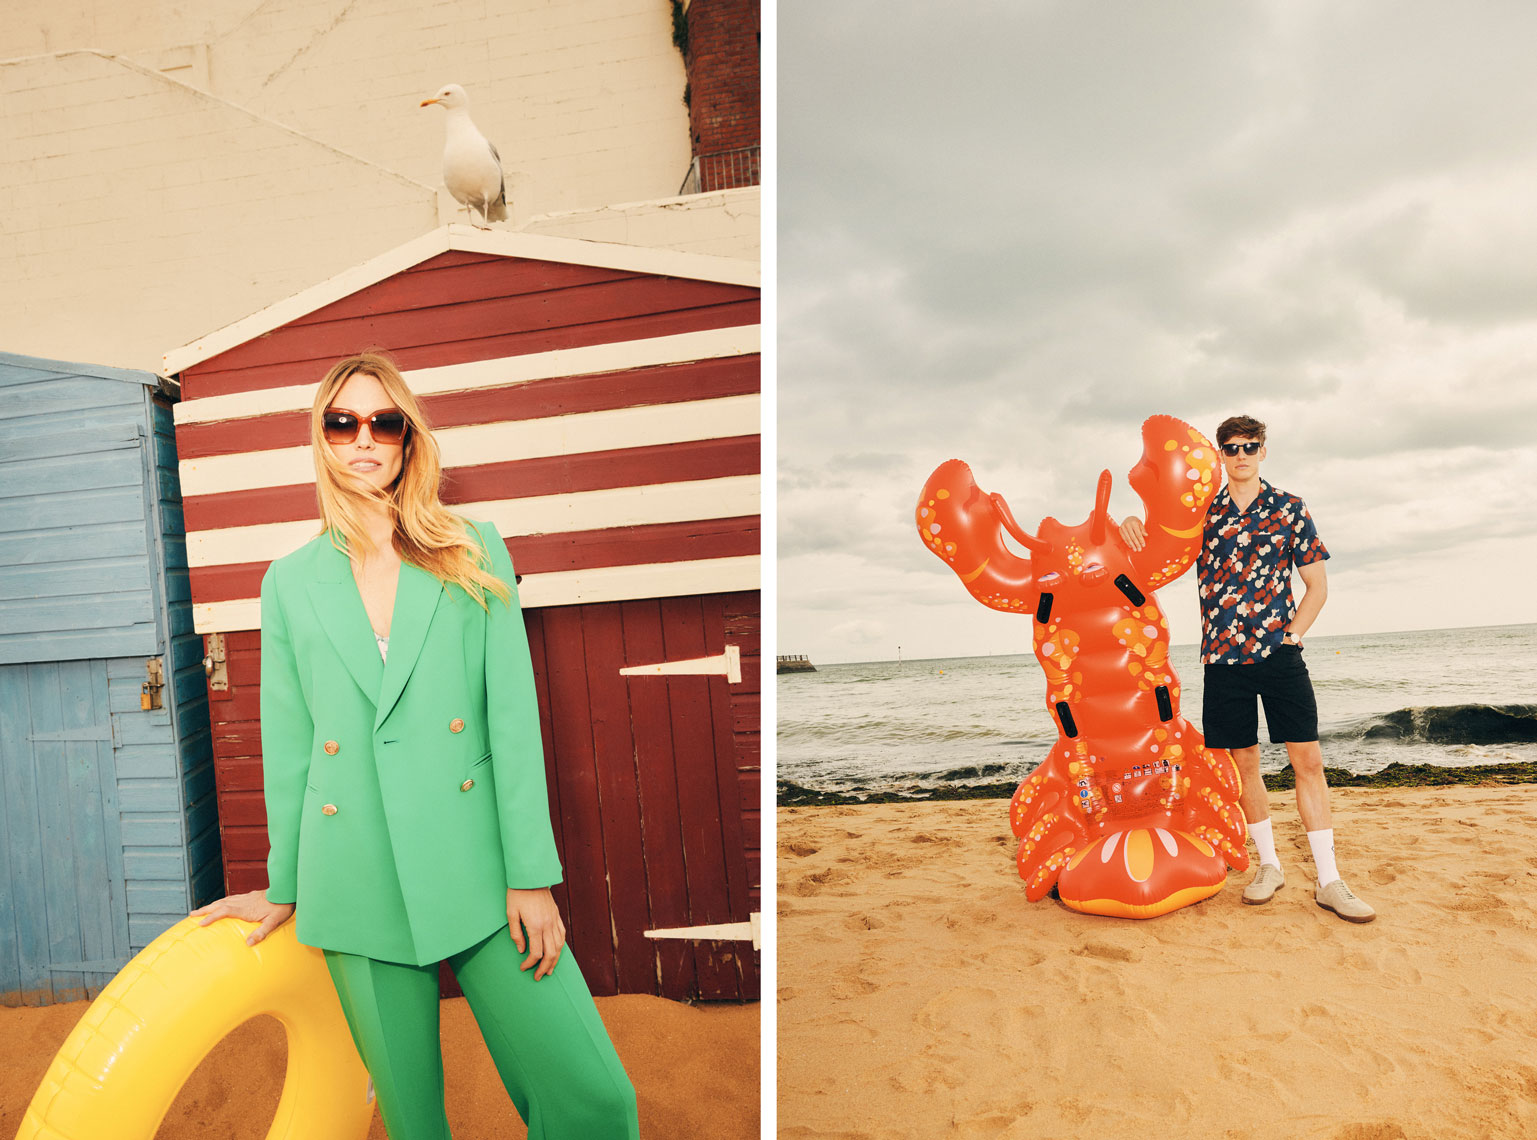 issie-gibbons-fashion-stylist-ted-baker-high-summer-campaign-british-seaside-lobster-seagull-inflatables